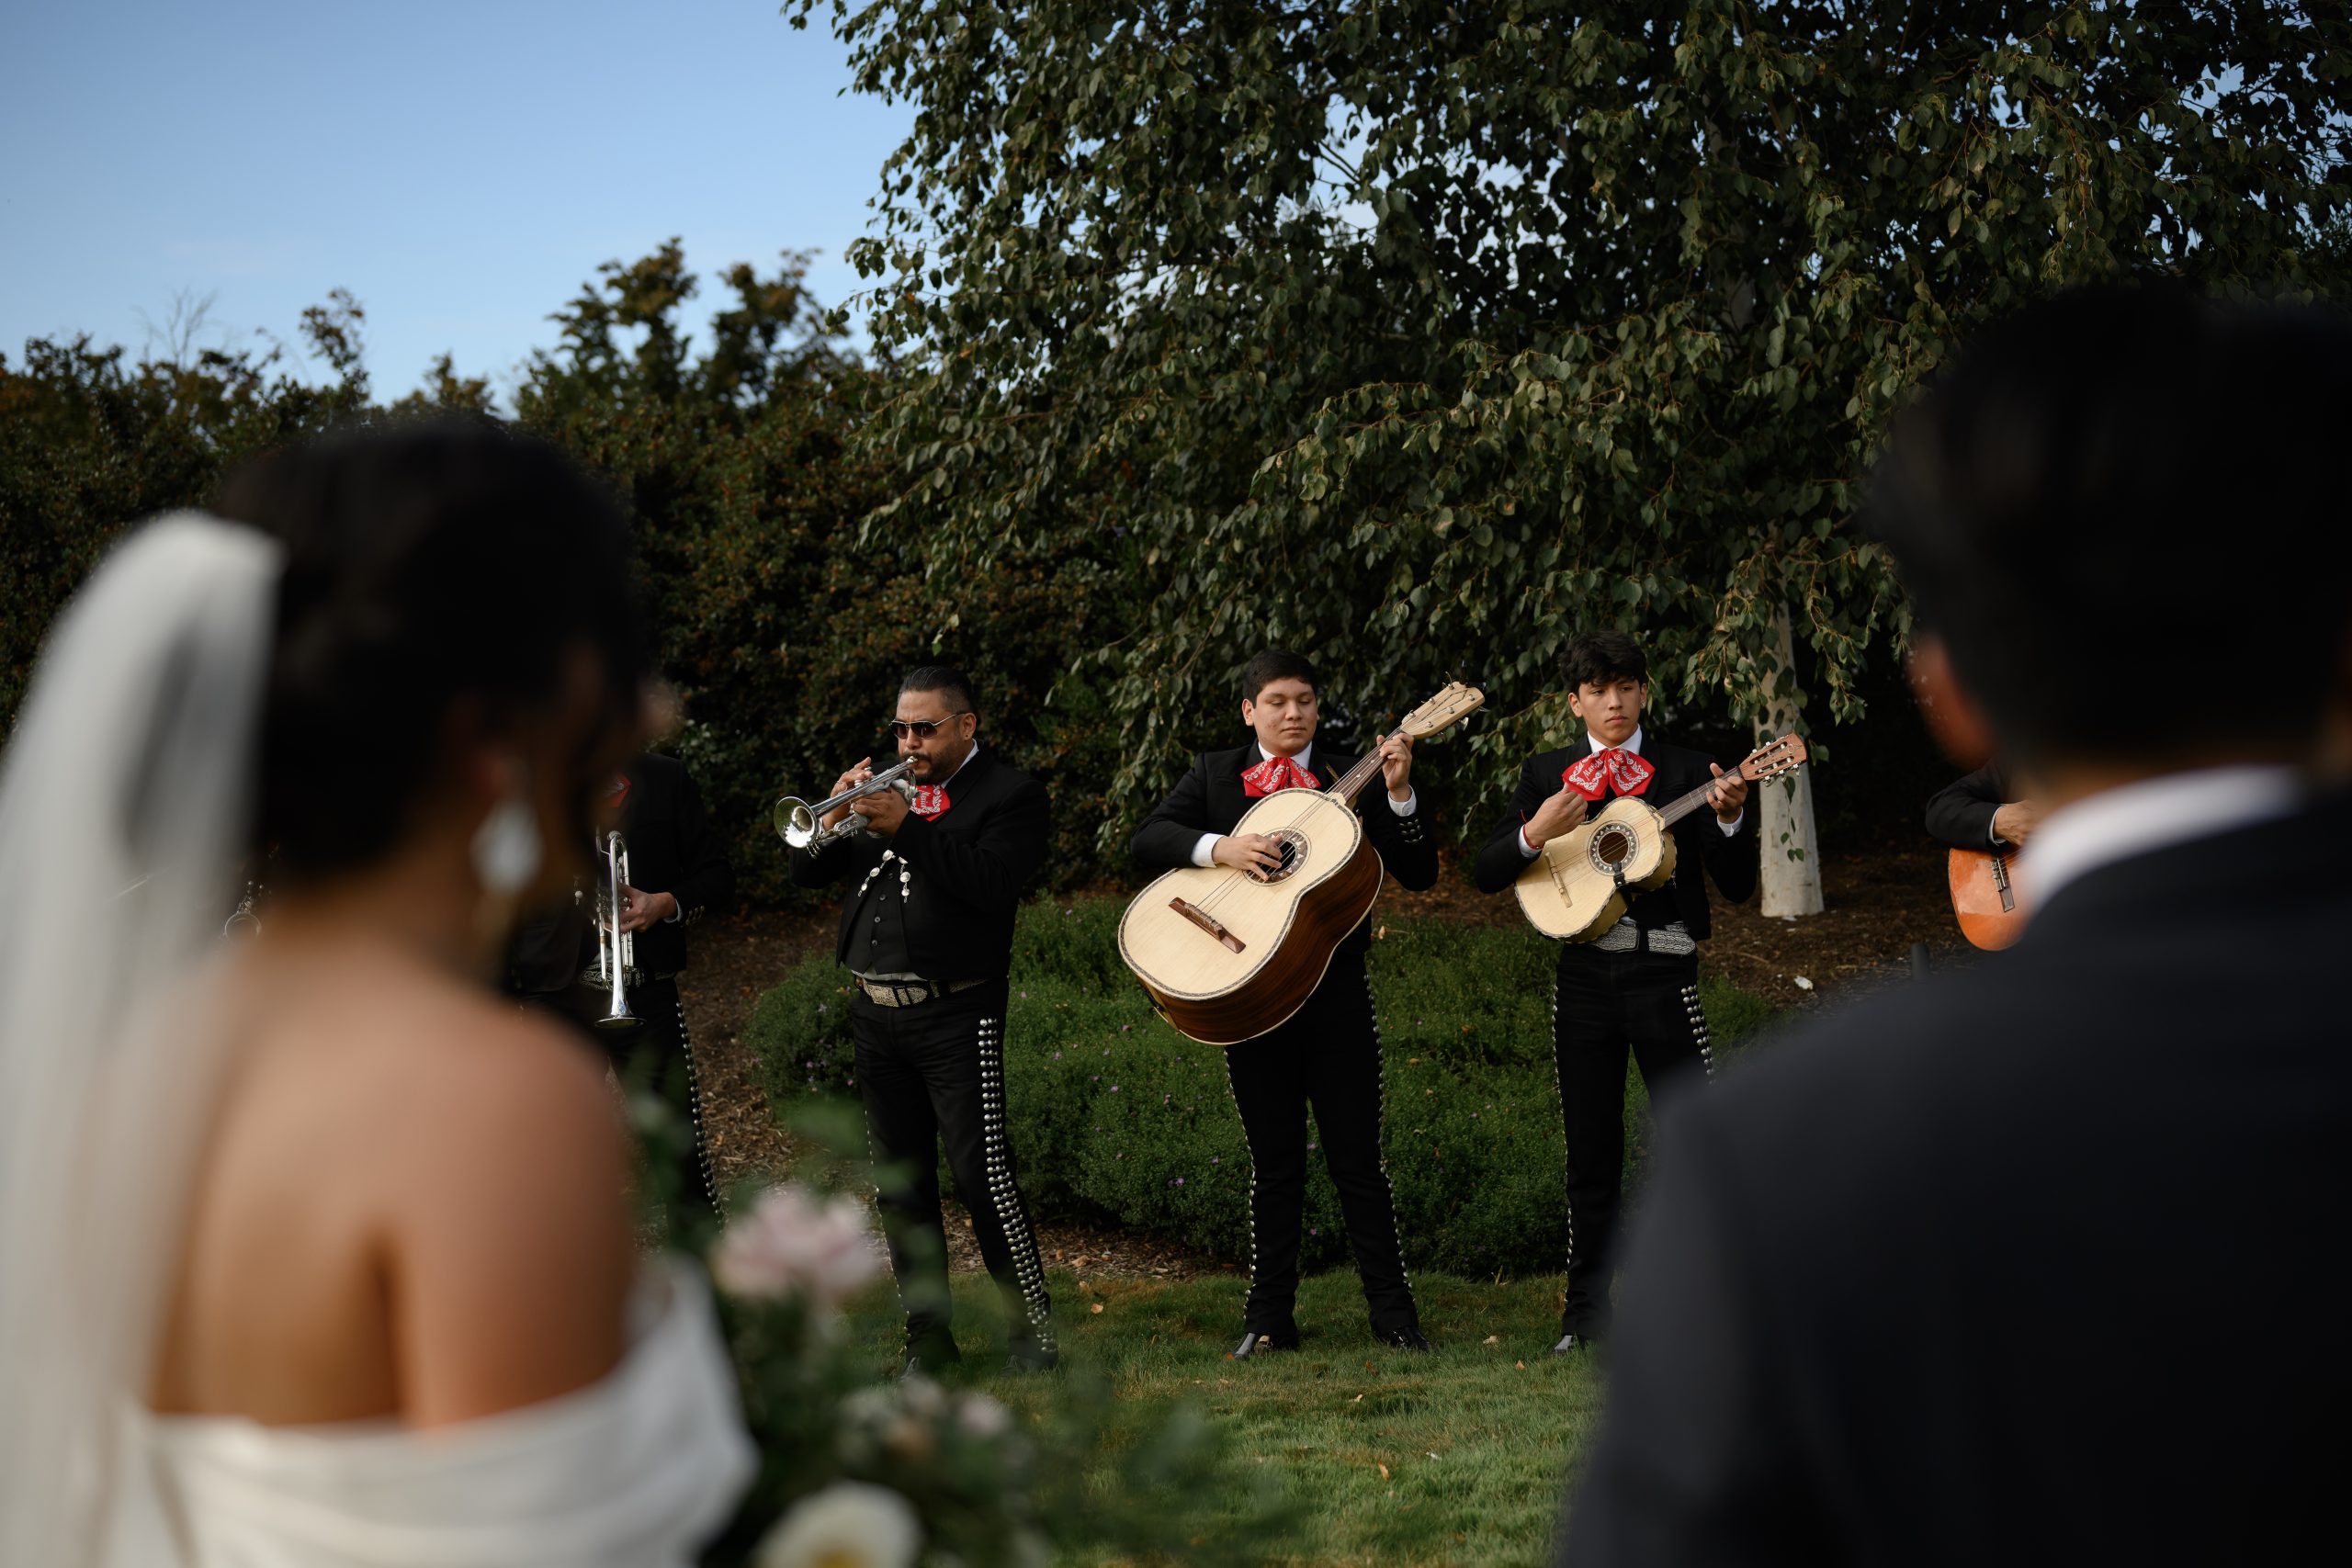 A mariachi band plays music as seen over the shoulder of the bride and groom.